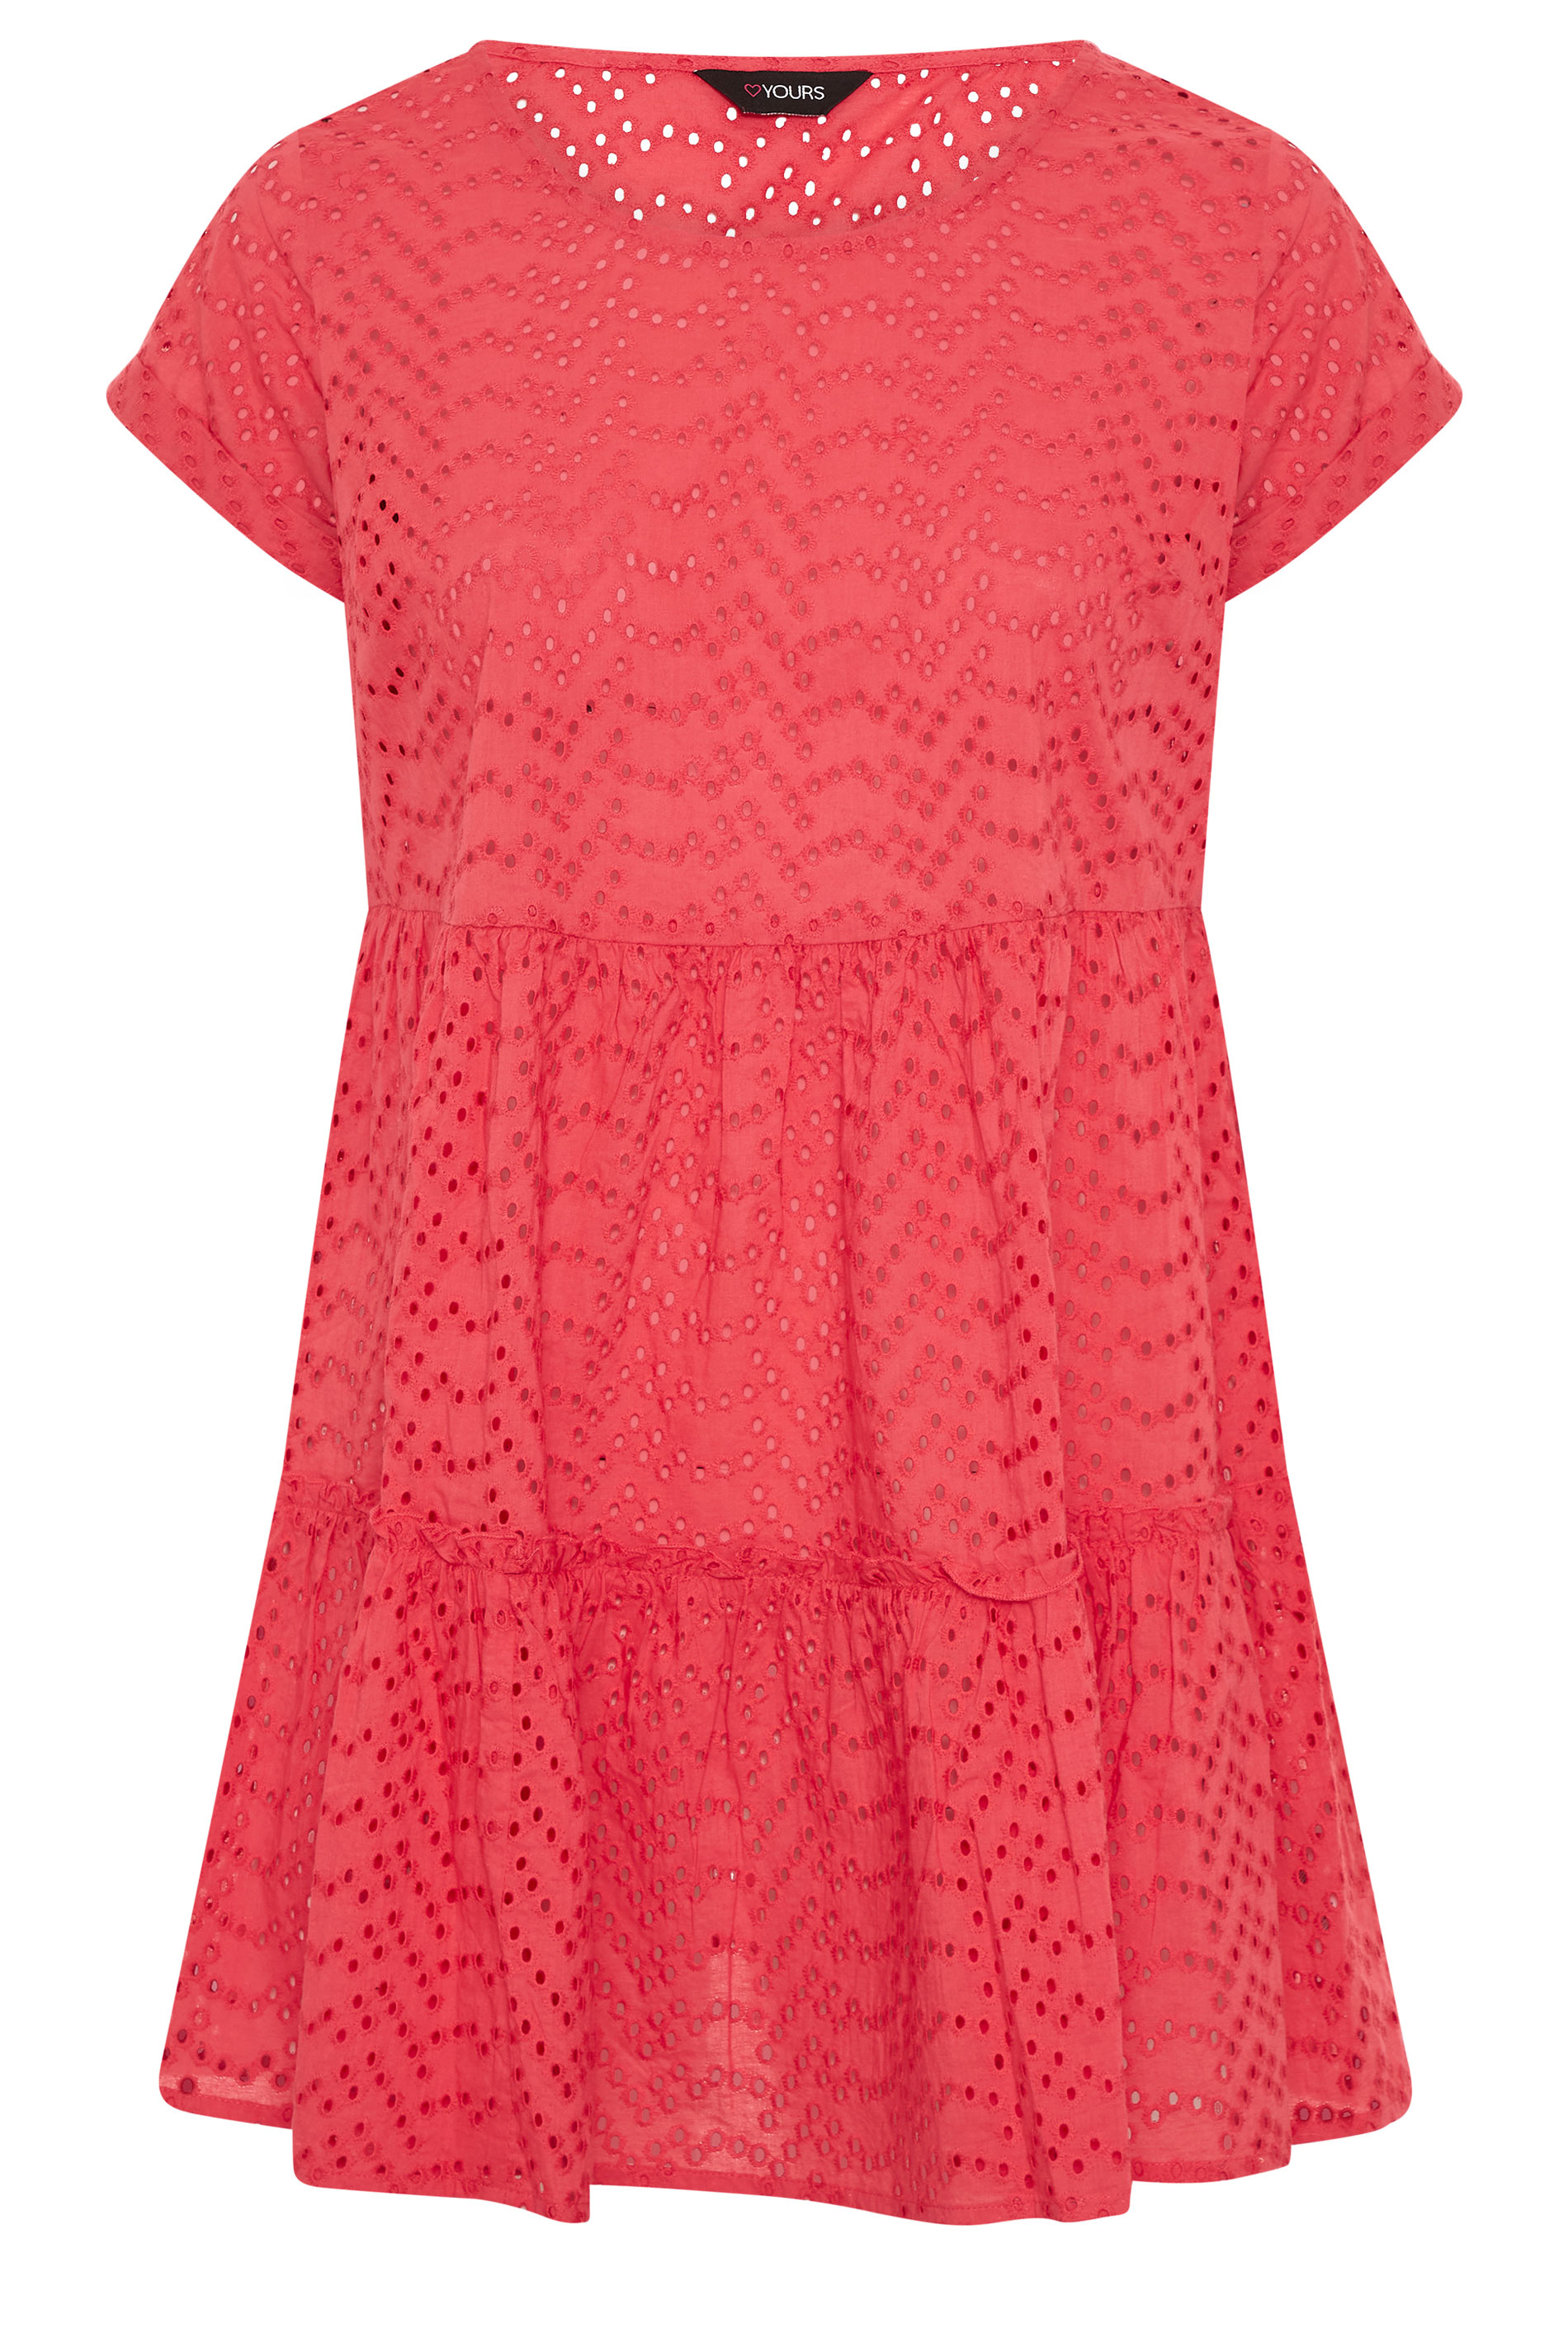 Grande taille  Tops Grande taille  Tuniques | Tunique Rose Corail Smocké Broderie Anglaise - MH74159